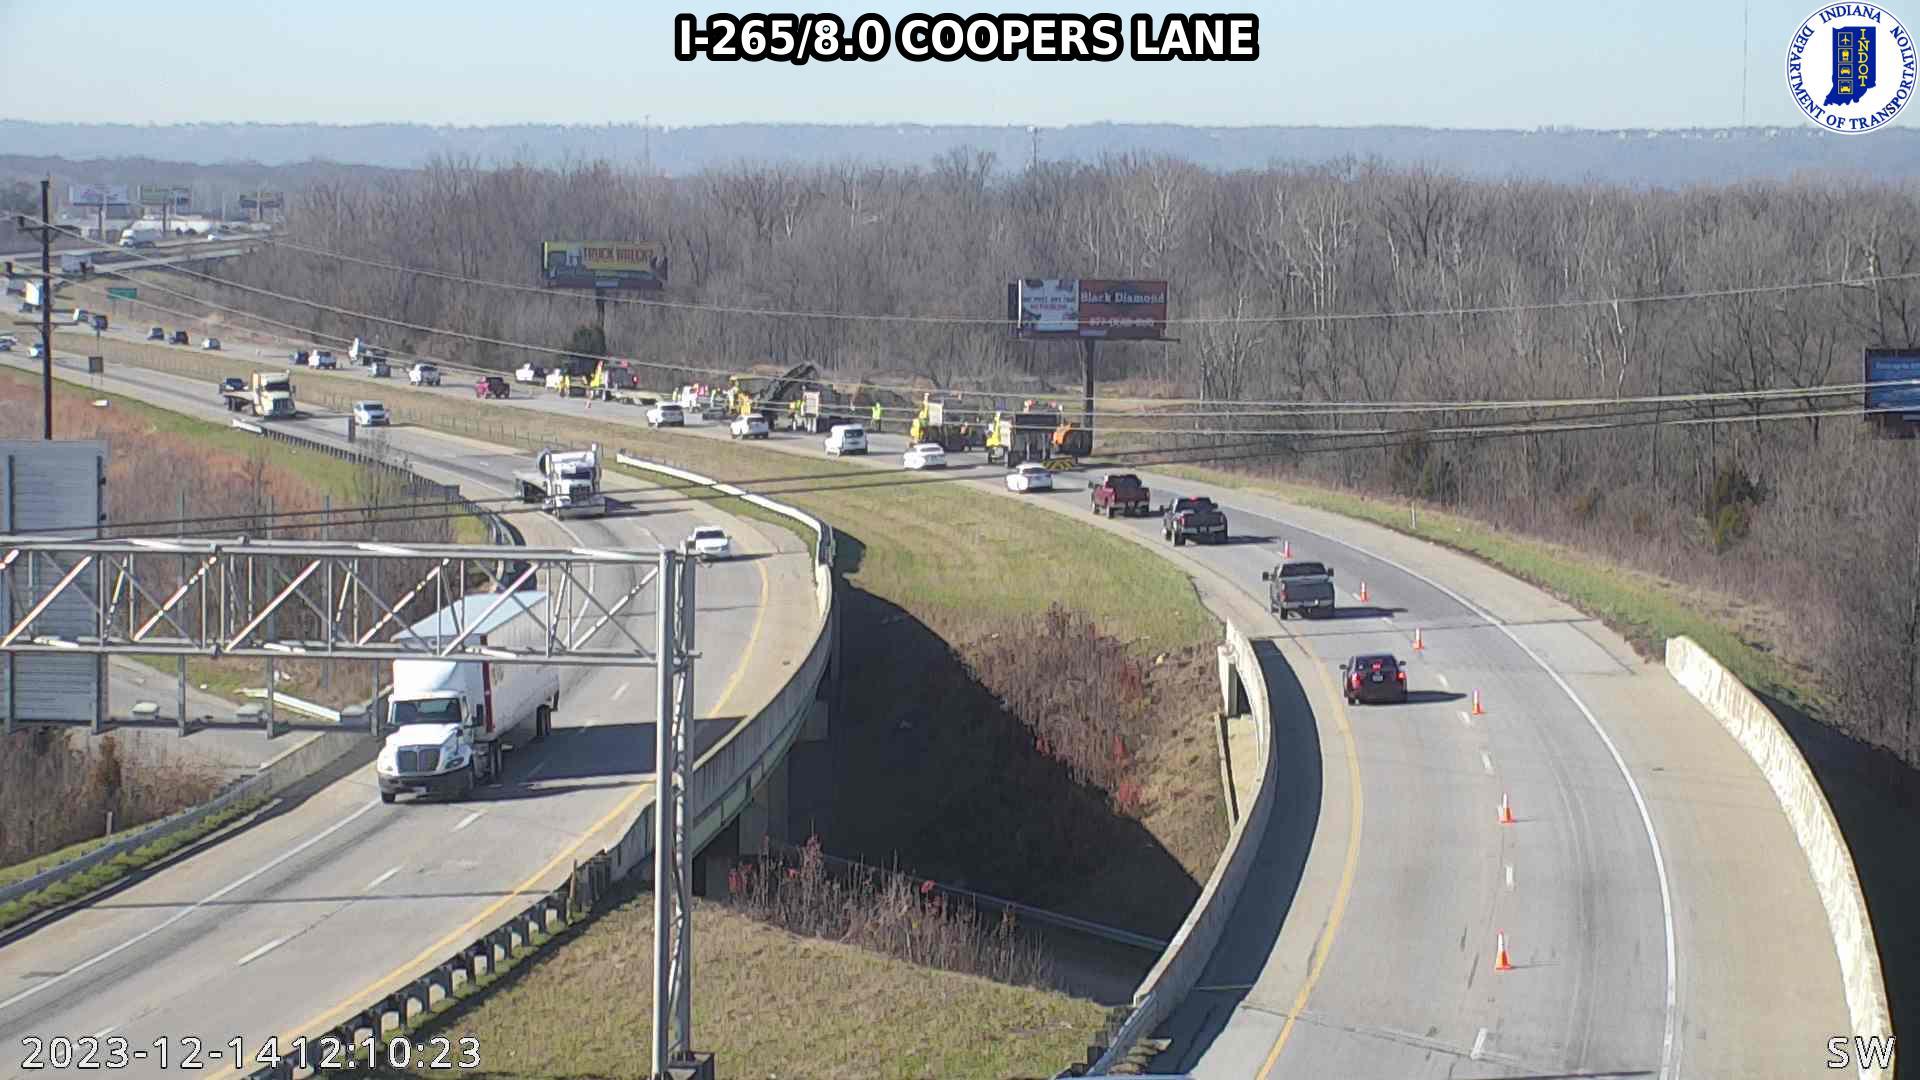 Traffic Cam Cementville: I-265: I-265/8.0 COOPERS LANE Player